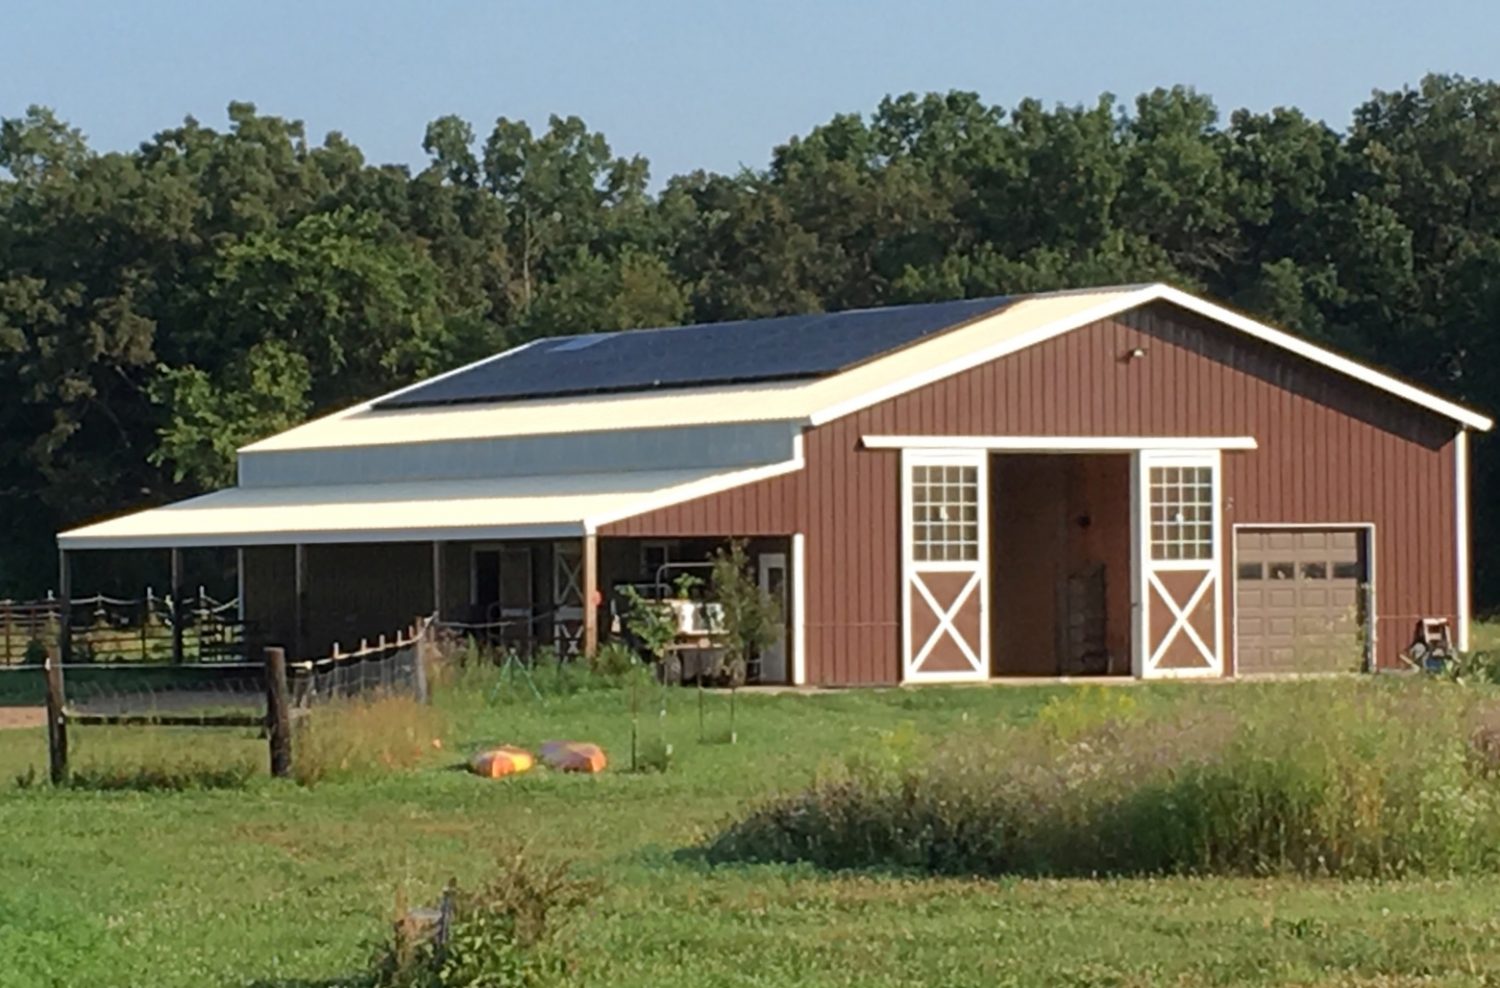 A 12.1-kilowatt system installed in Amherst this month as part of the Solar Central Wisconsin Group Buy Program.